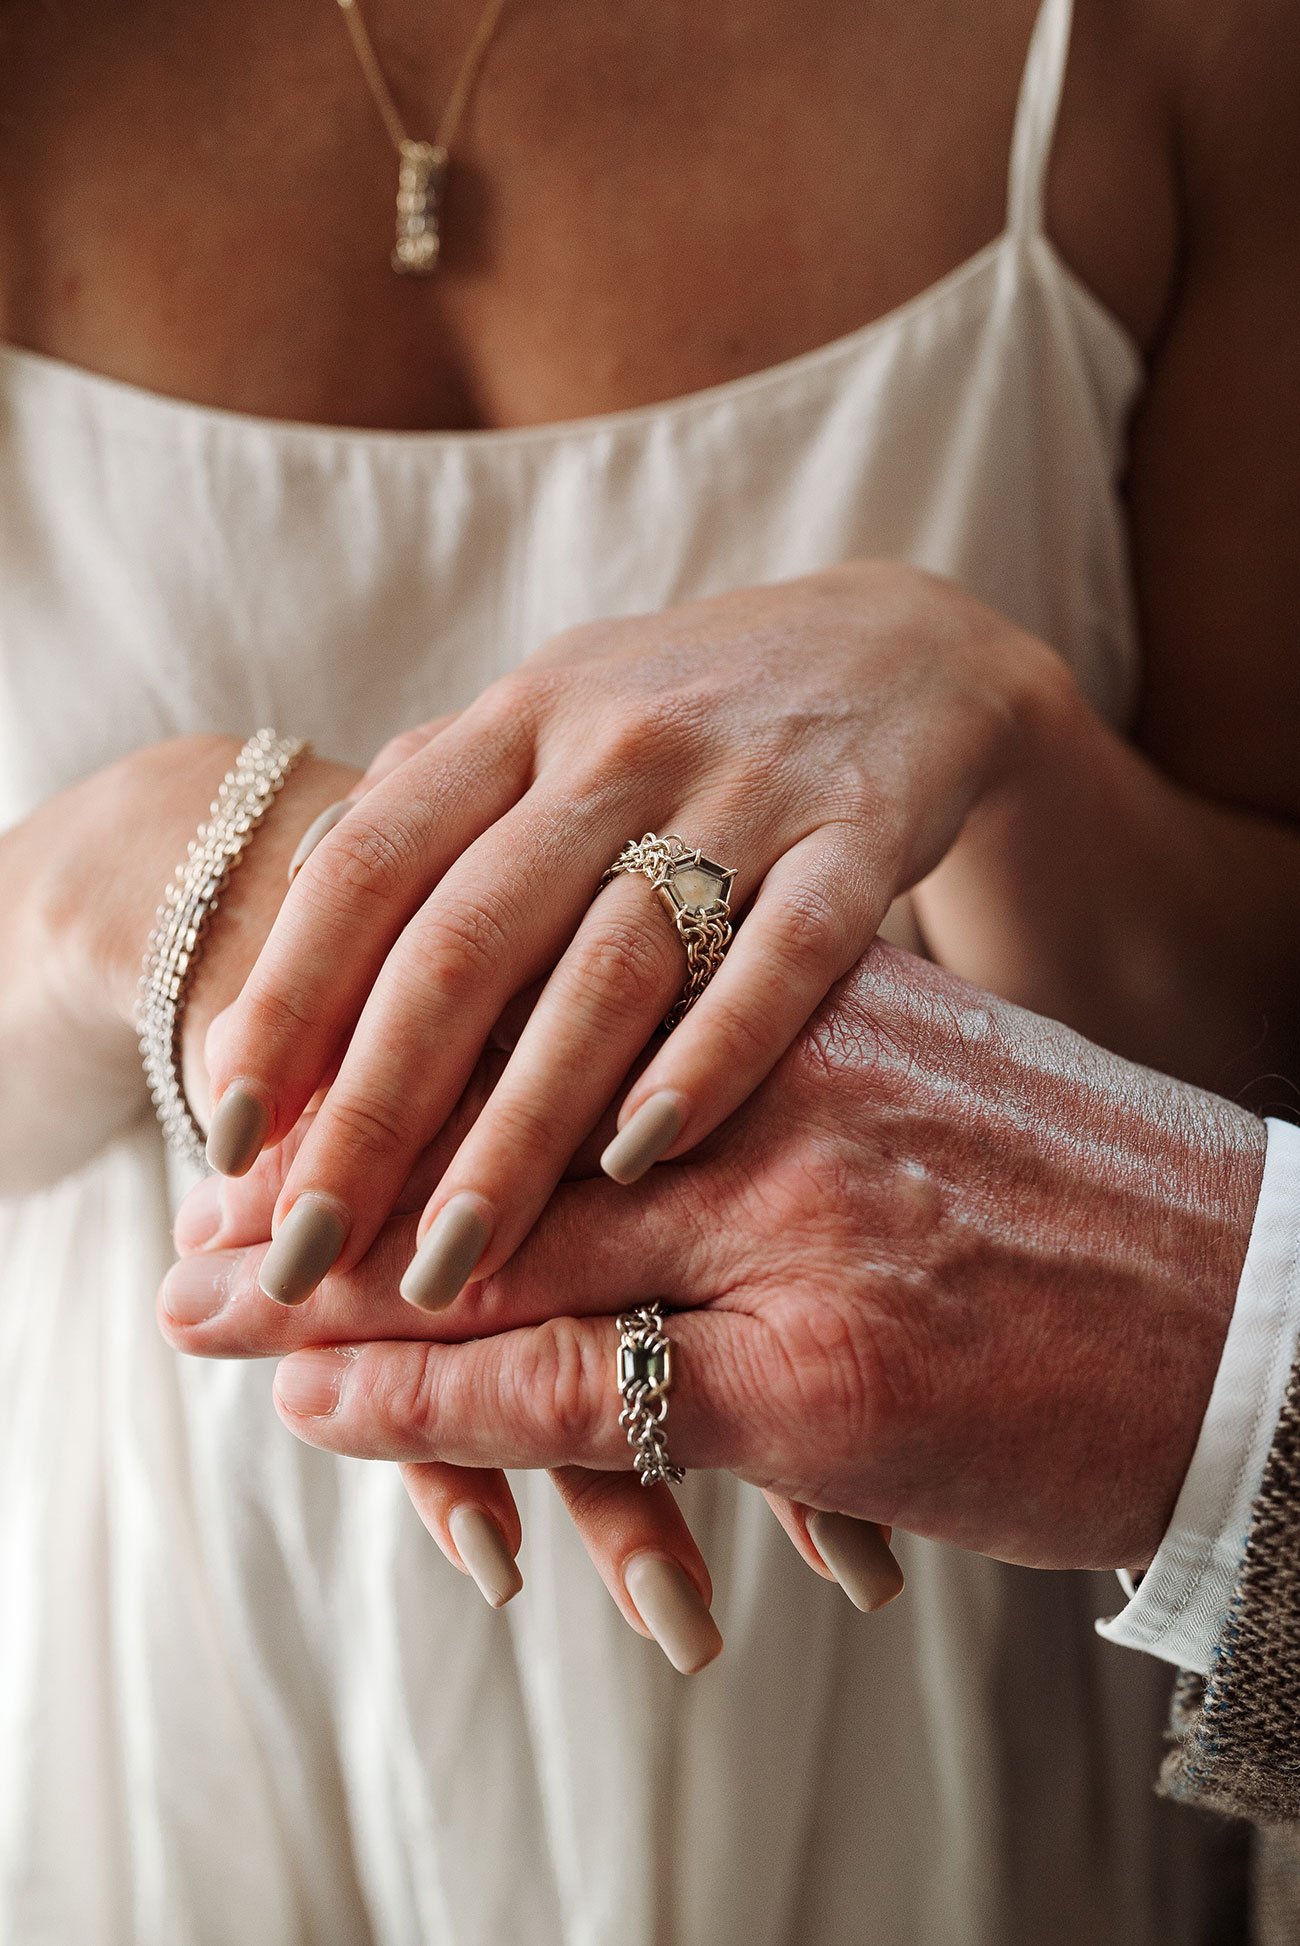 Bride with hand over the groom showing their wedding rings